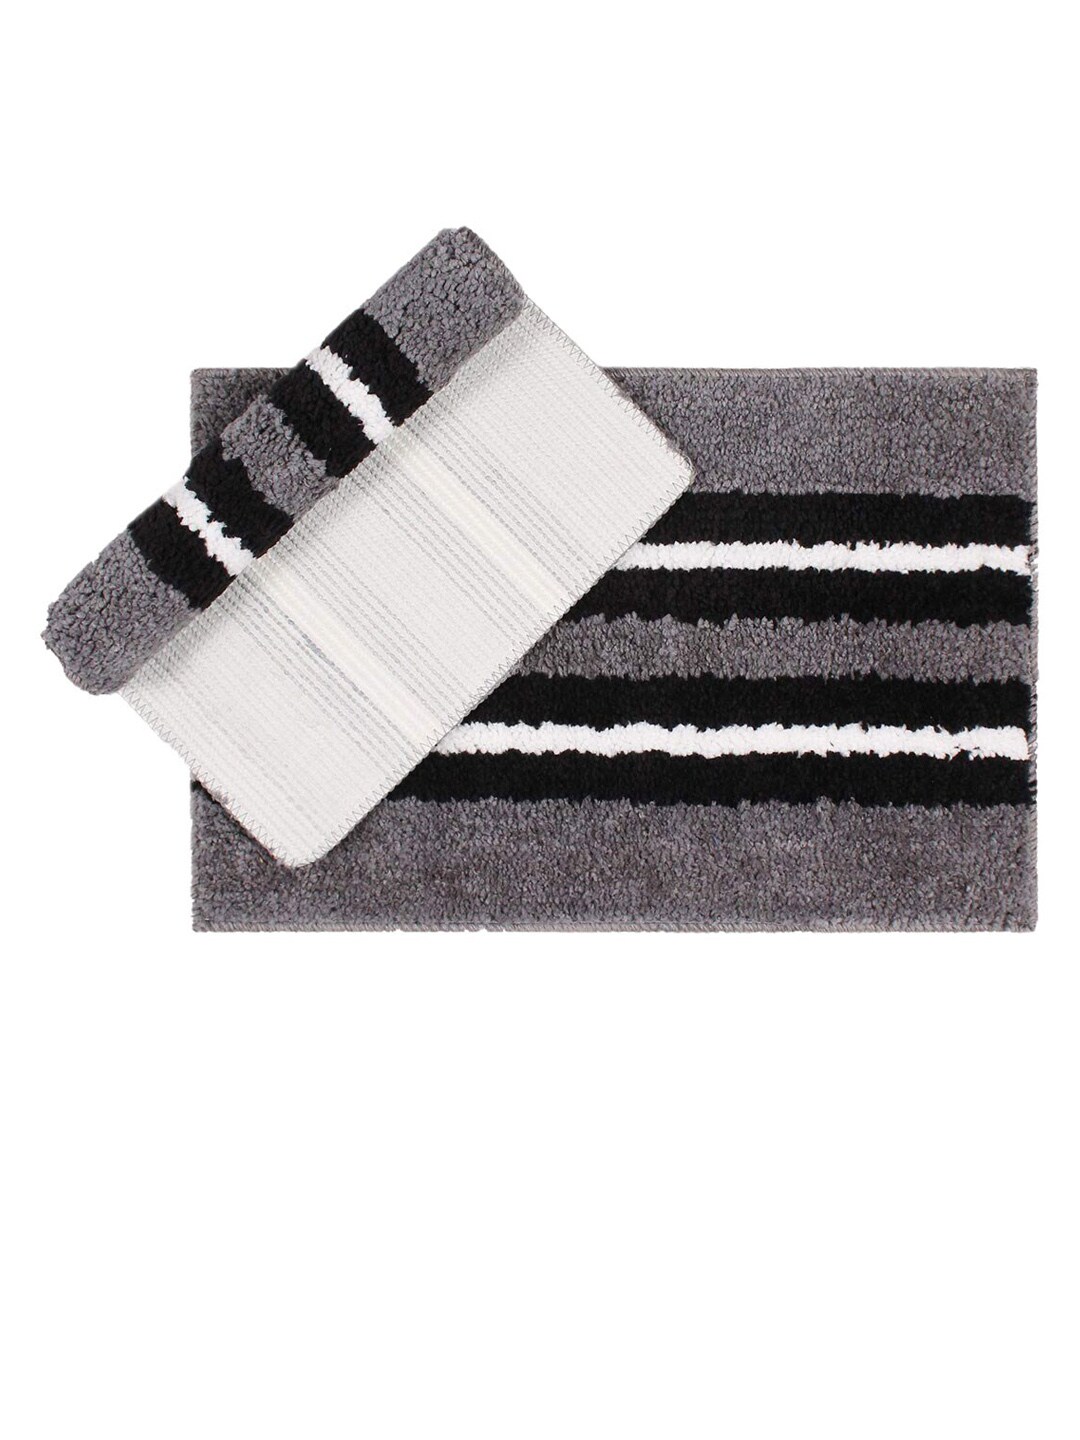 LUXEHOME INTERNATIONAL Set of 2 Grey & White Stripped Bath Rugs Price in India